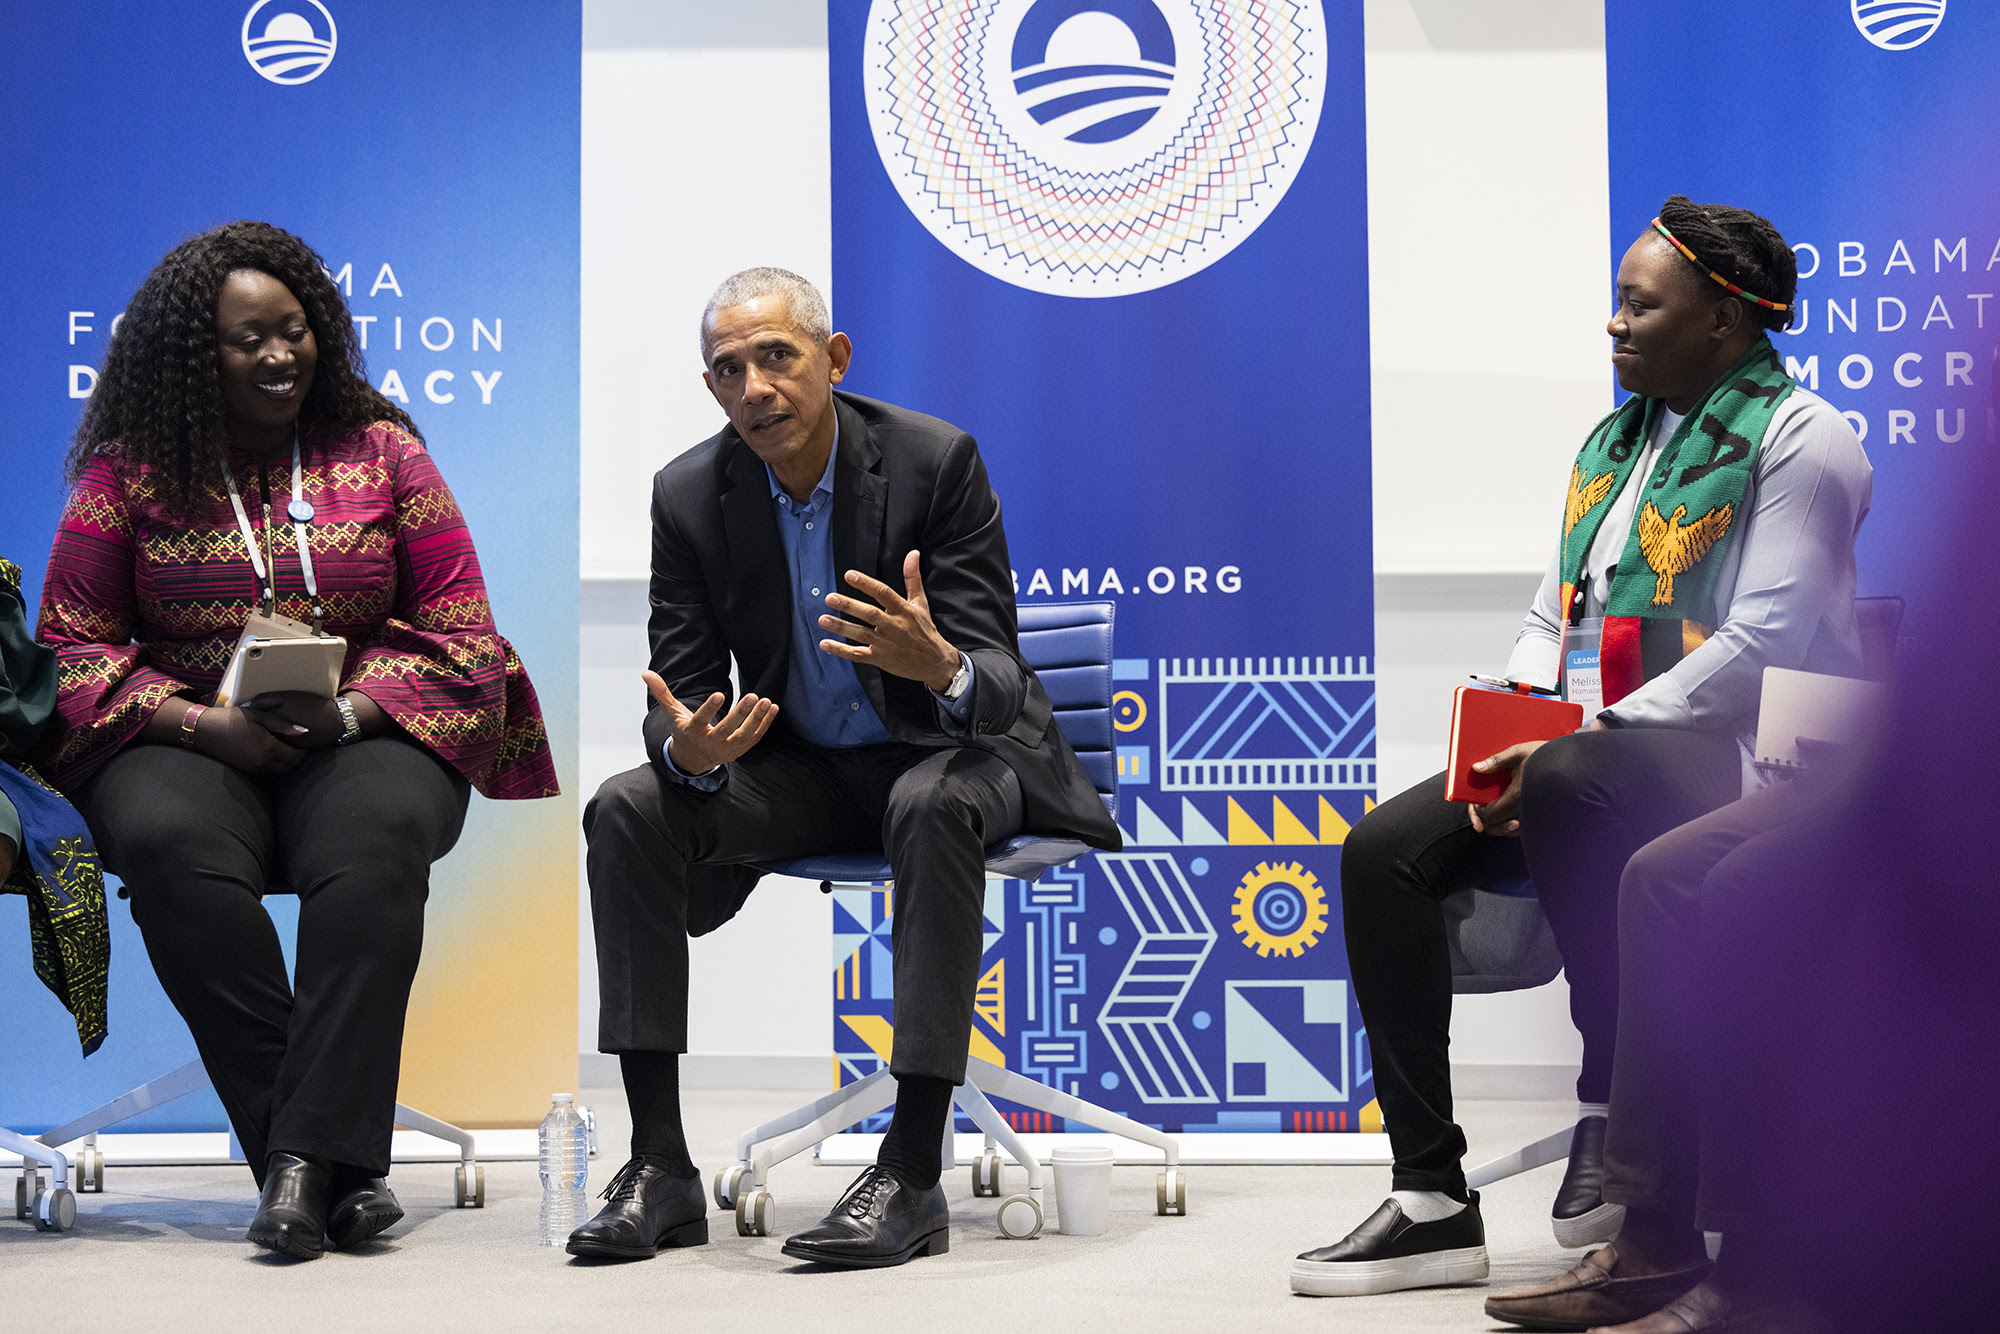 President Obama sits on a stage between a young women and a young man with deep skin tones. In the background are blue and white graphics that read, “Obama.org” and “The Obama Foundation Democracy Forum.” 